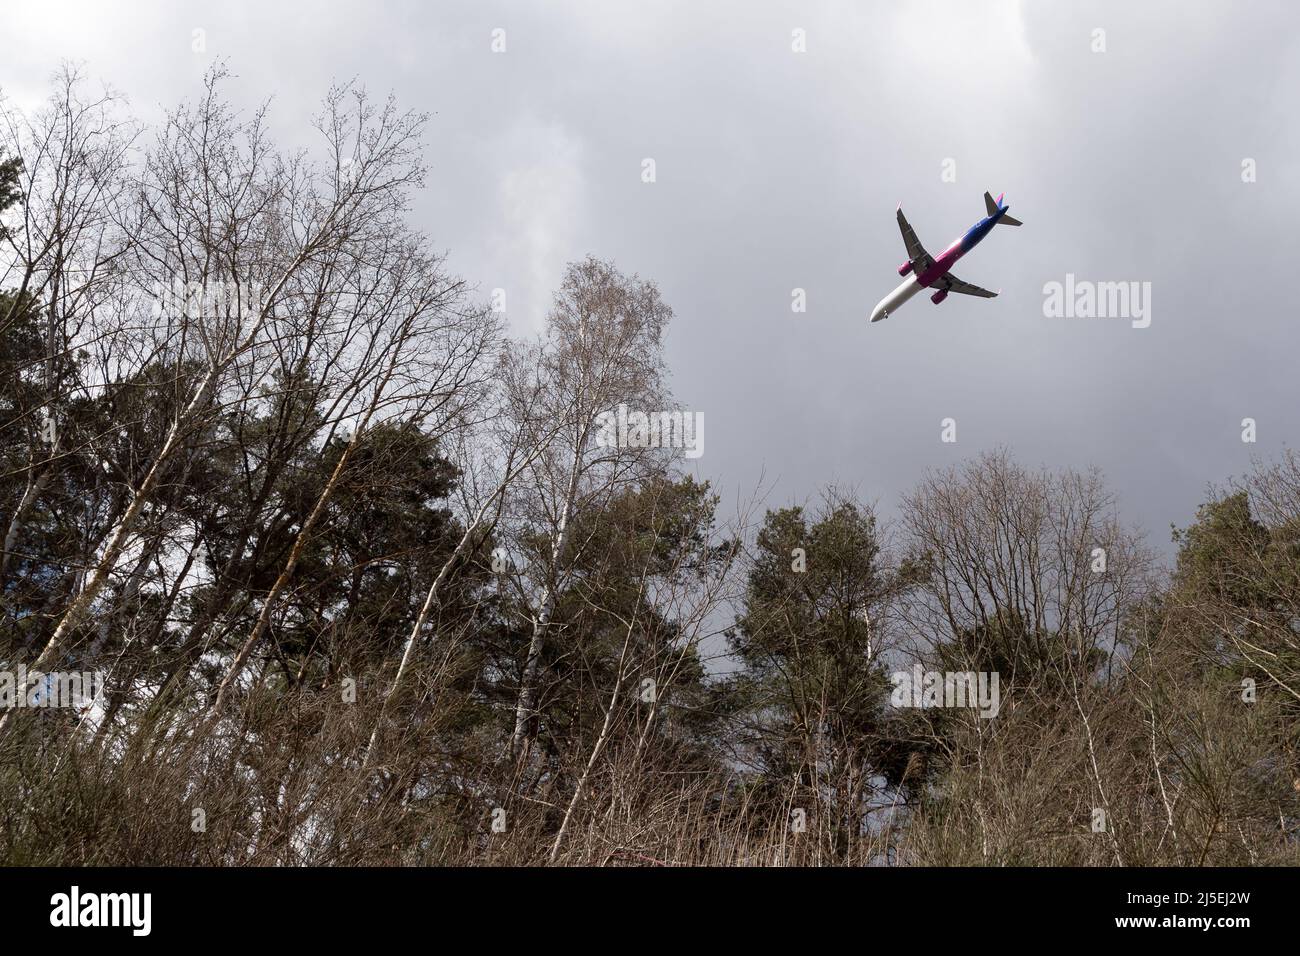 Low cost airline Wizz Air aircraft Airbus A320-232 in Gdansk, Poland © Wojciech Strozyk / Alamy Stock Photo *** Local Caption *** Stock Photo